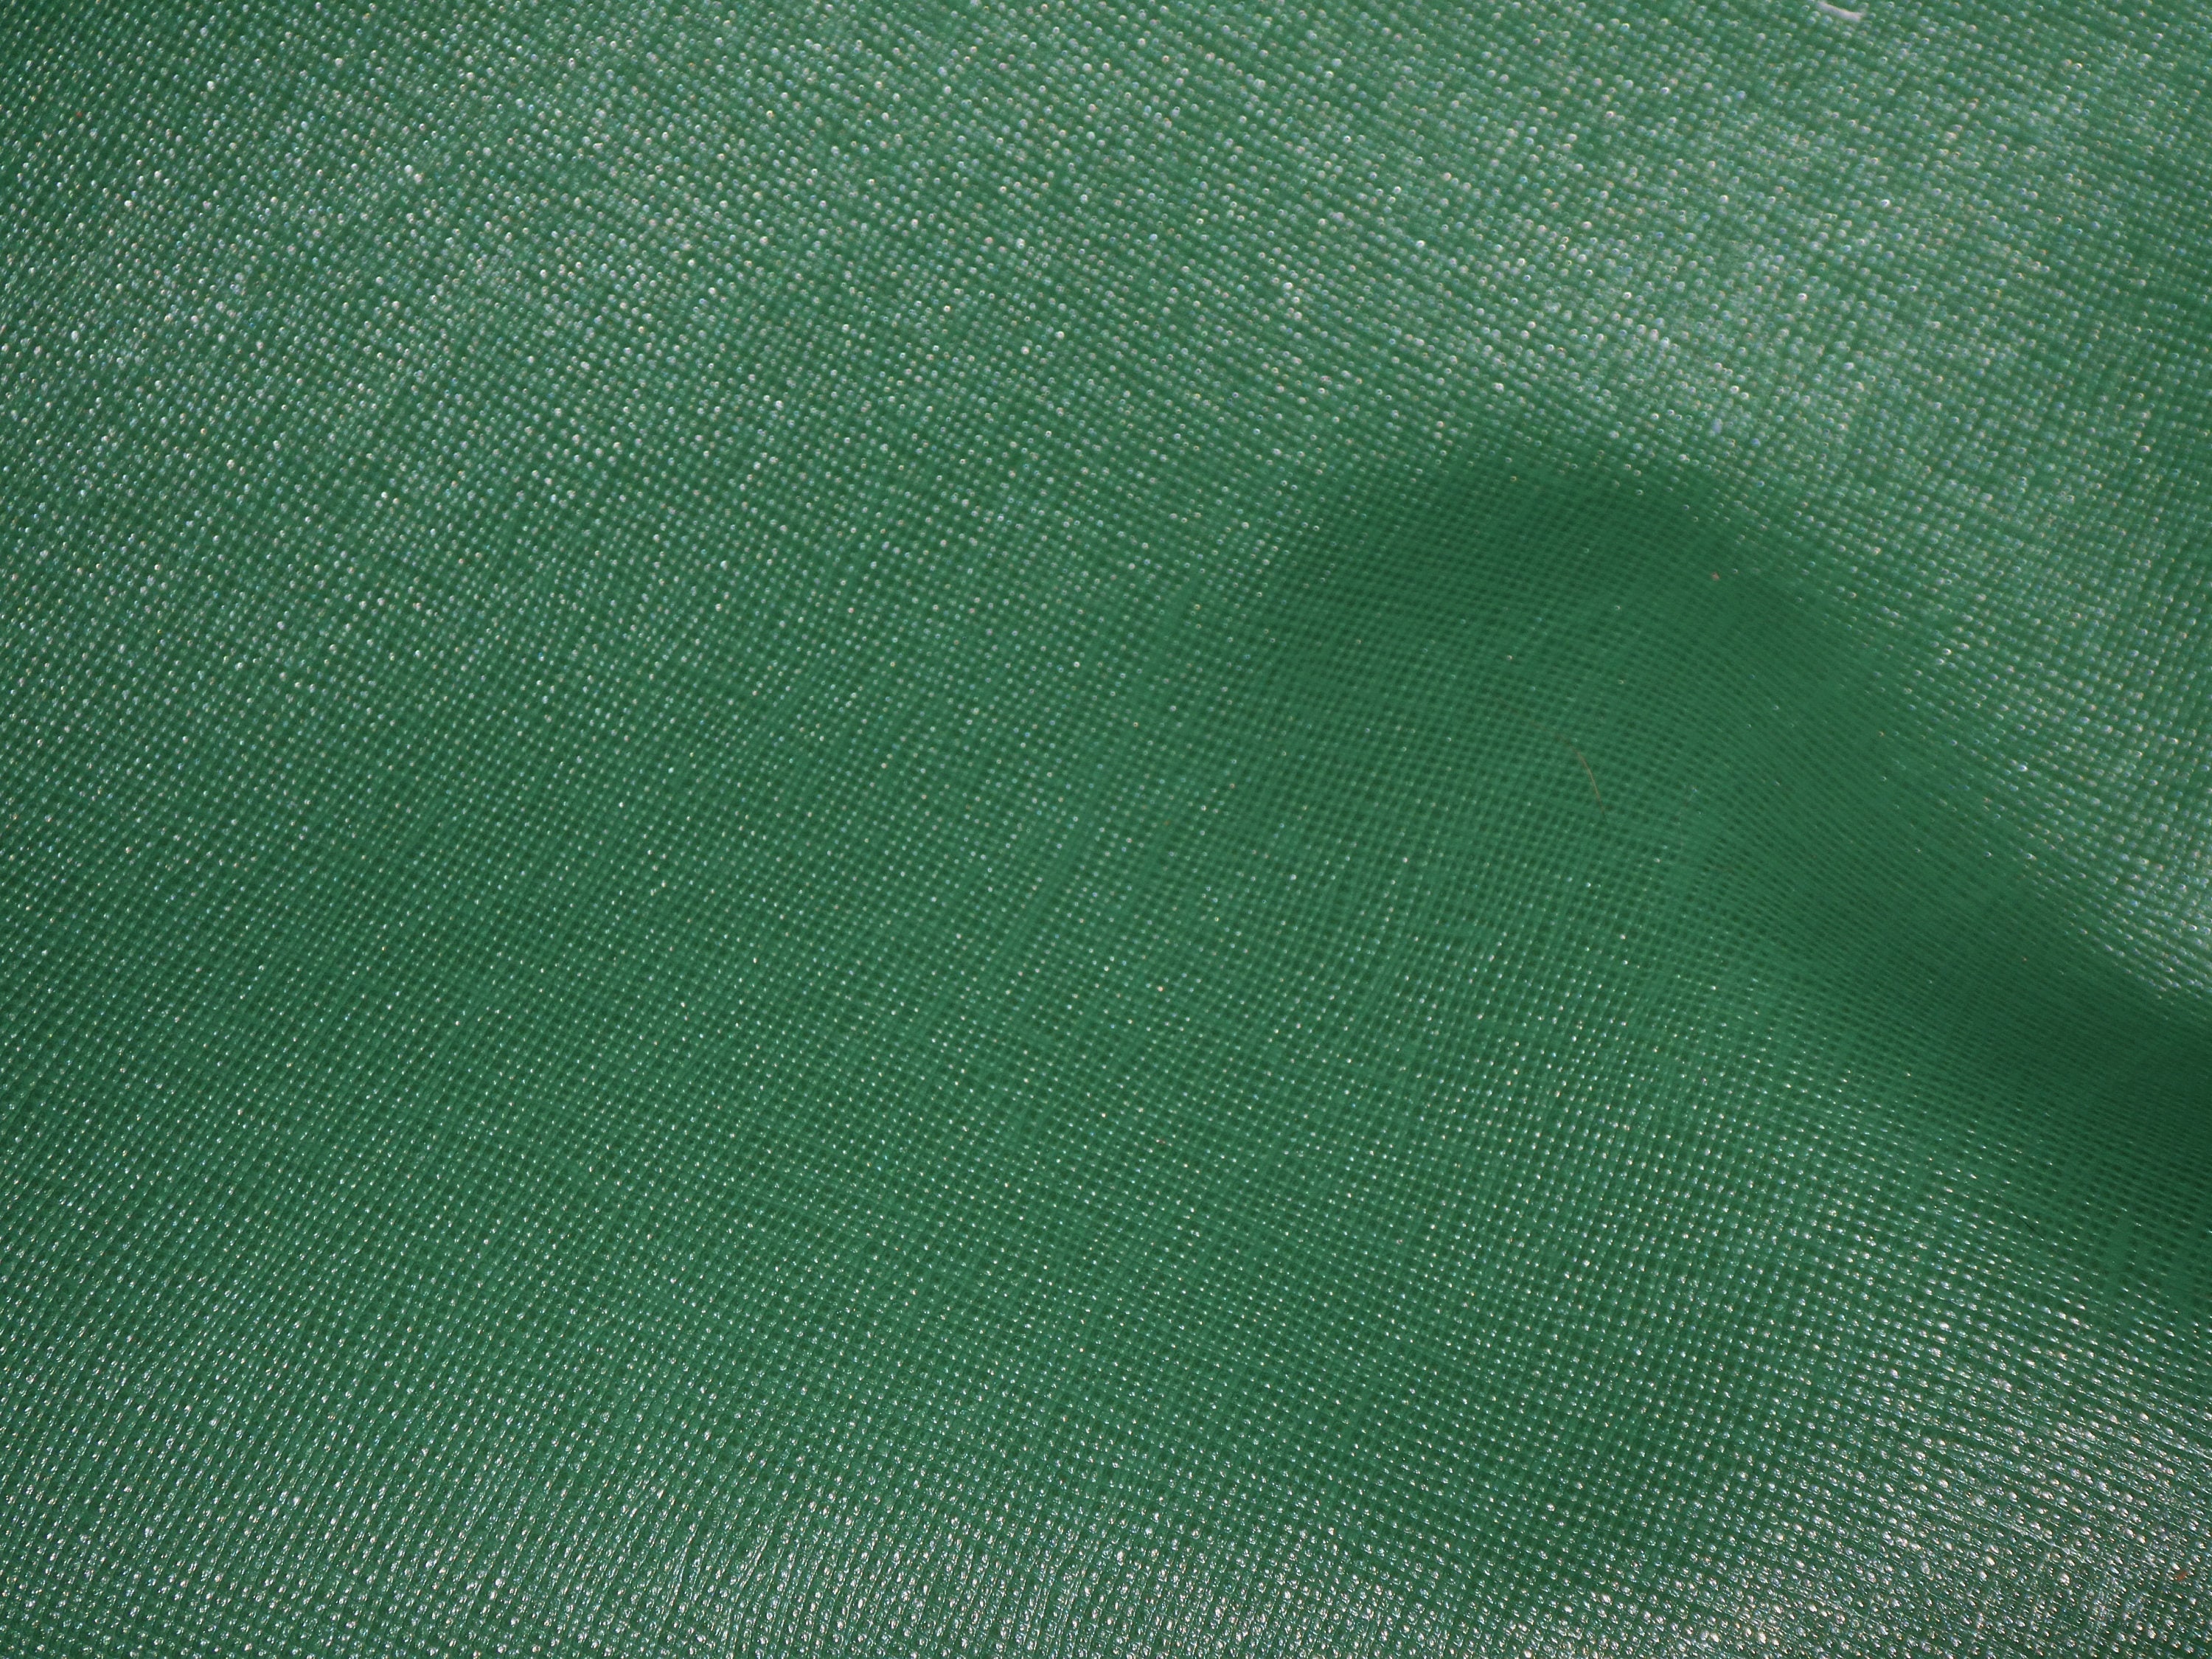 Saffiano Leather 3, 4, 5, or 6 sq ft SHAMROCK Forest GREEN Weave Embossed  Cowhide 2.5-3 oz/ 1-1.2 mm (Ships rolled)PSA E8201-23 hides too